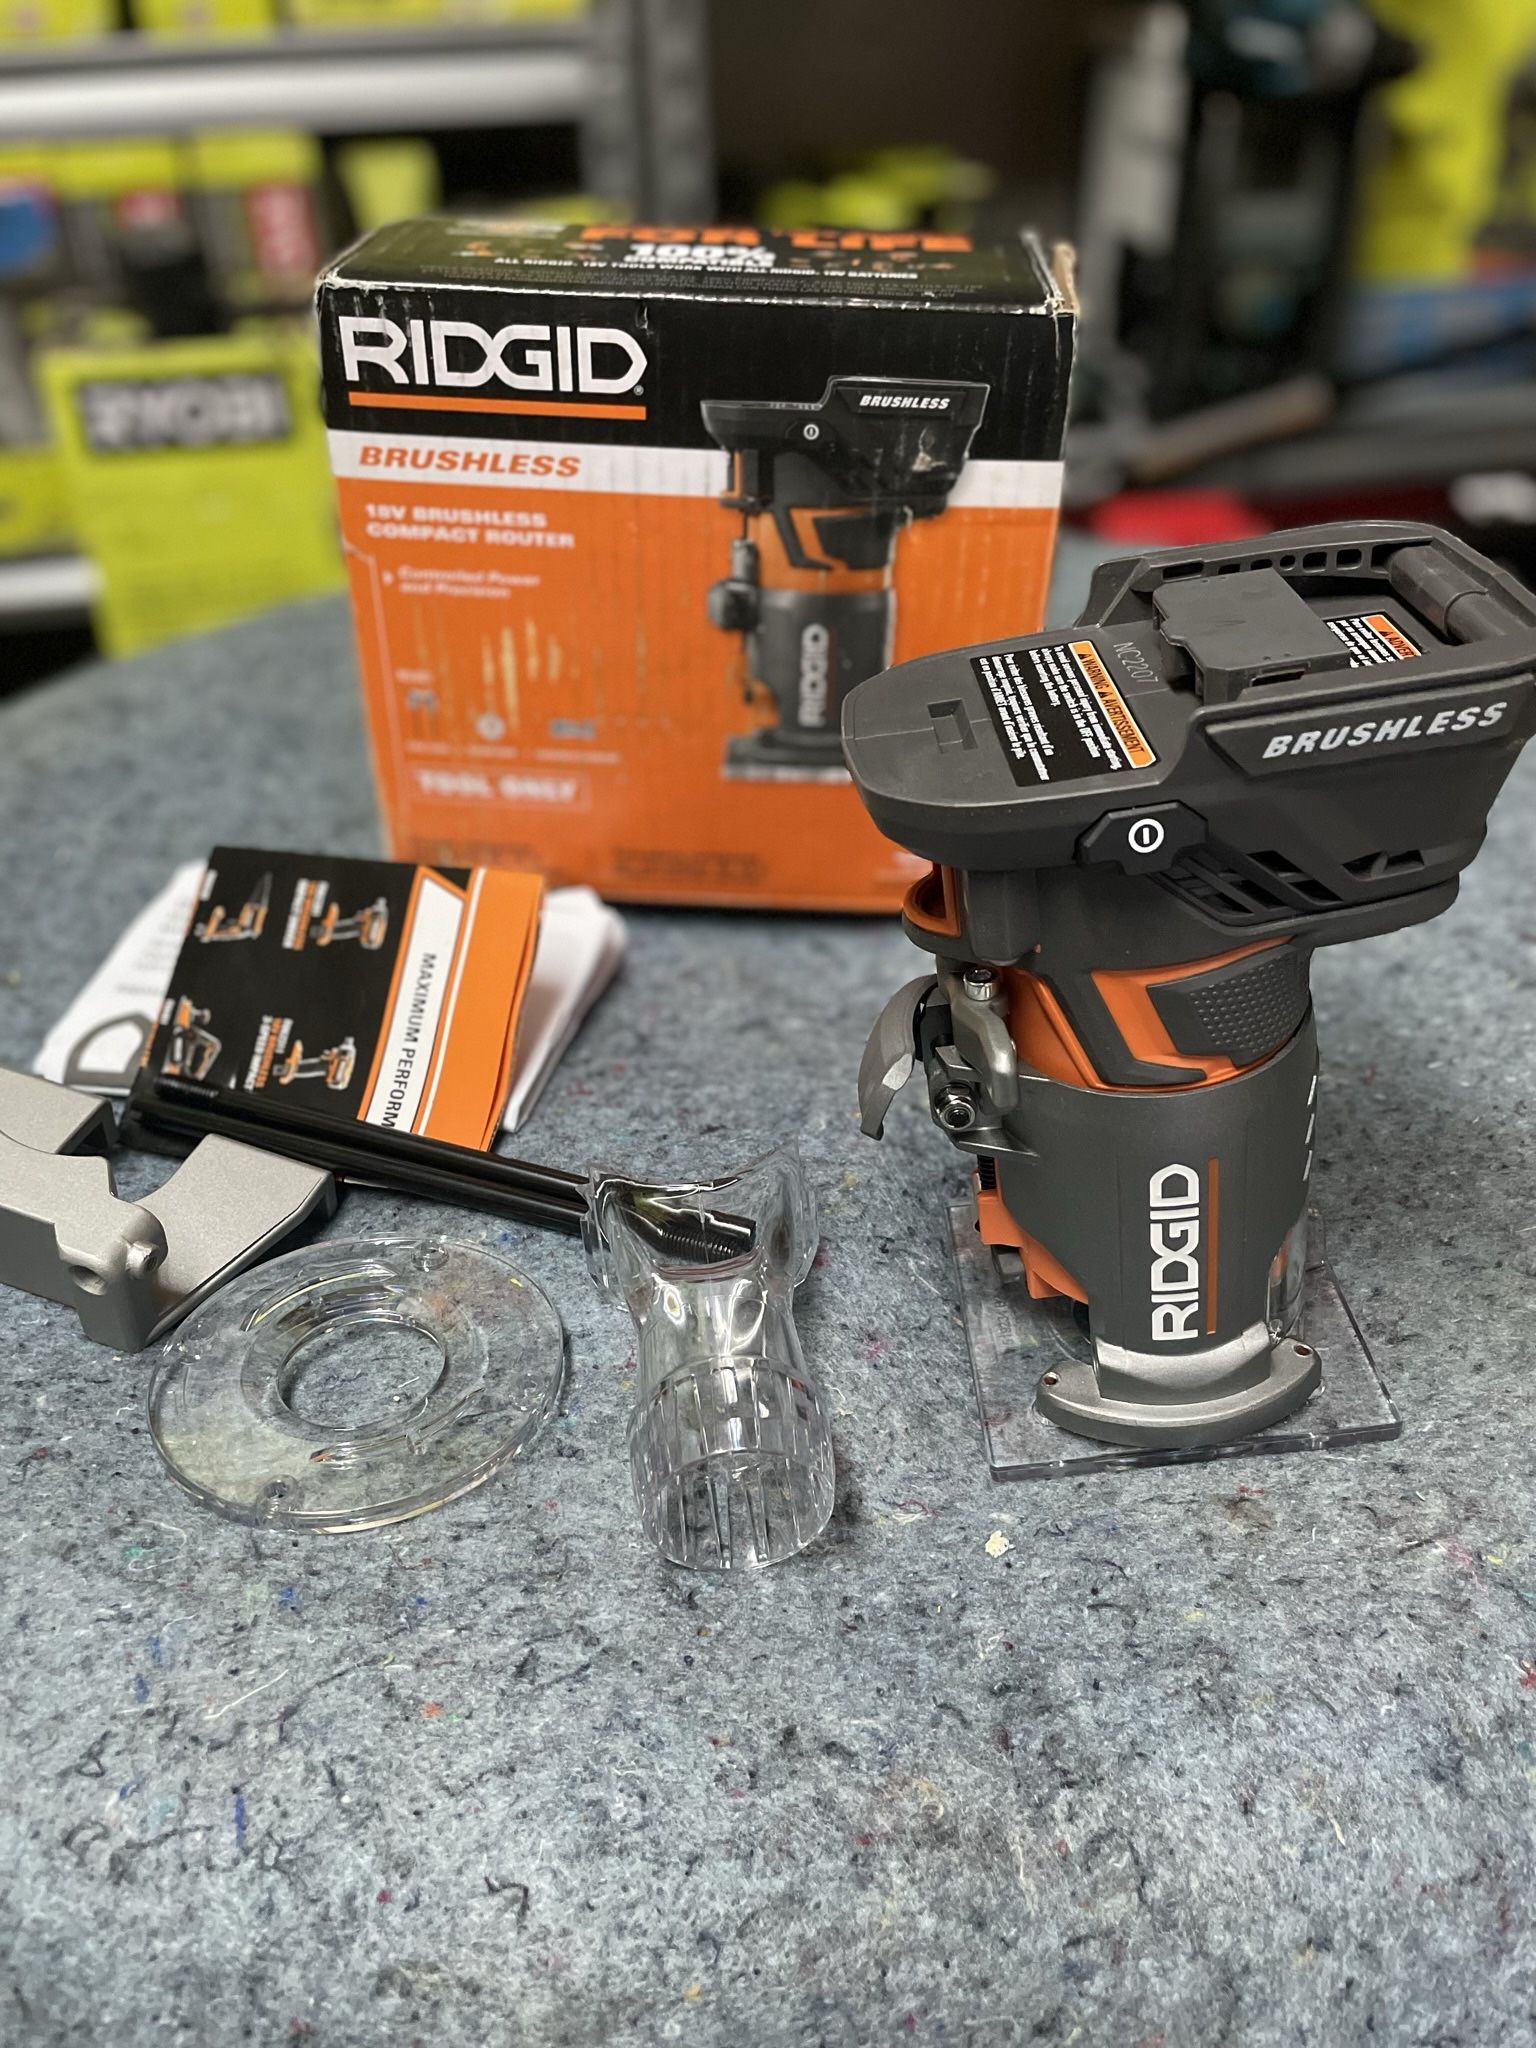 RIDGID 18V OCTANE Brushless Cordless Compact Fixed Base Router with 1/4 in. Bit, Round and Square Bases and Collet Wrench